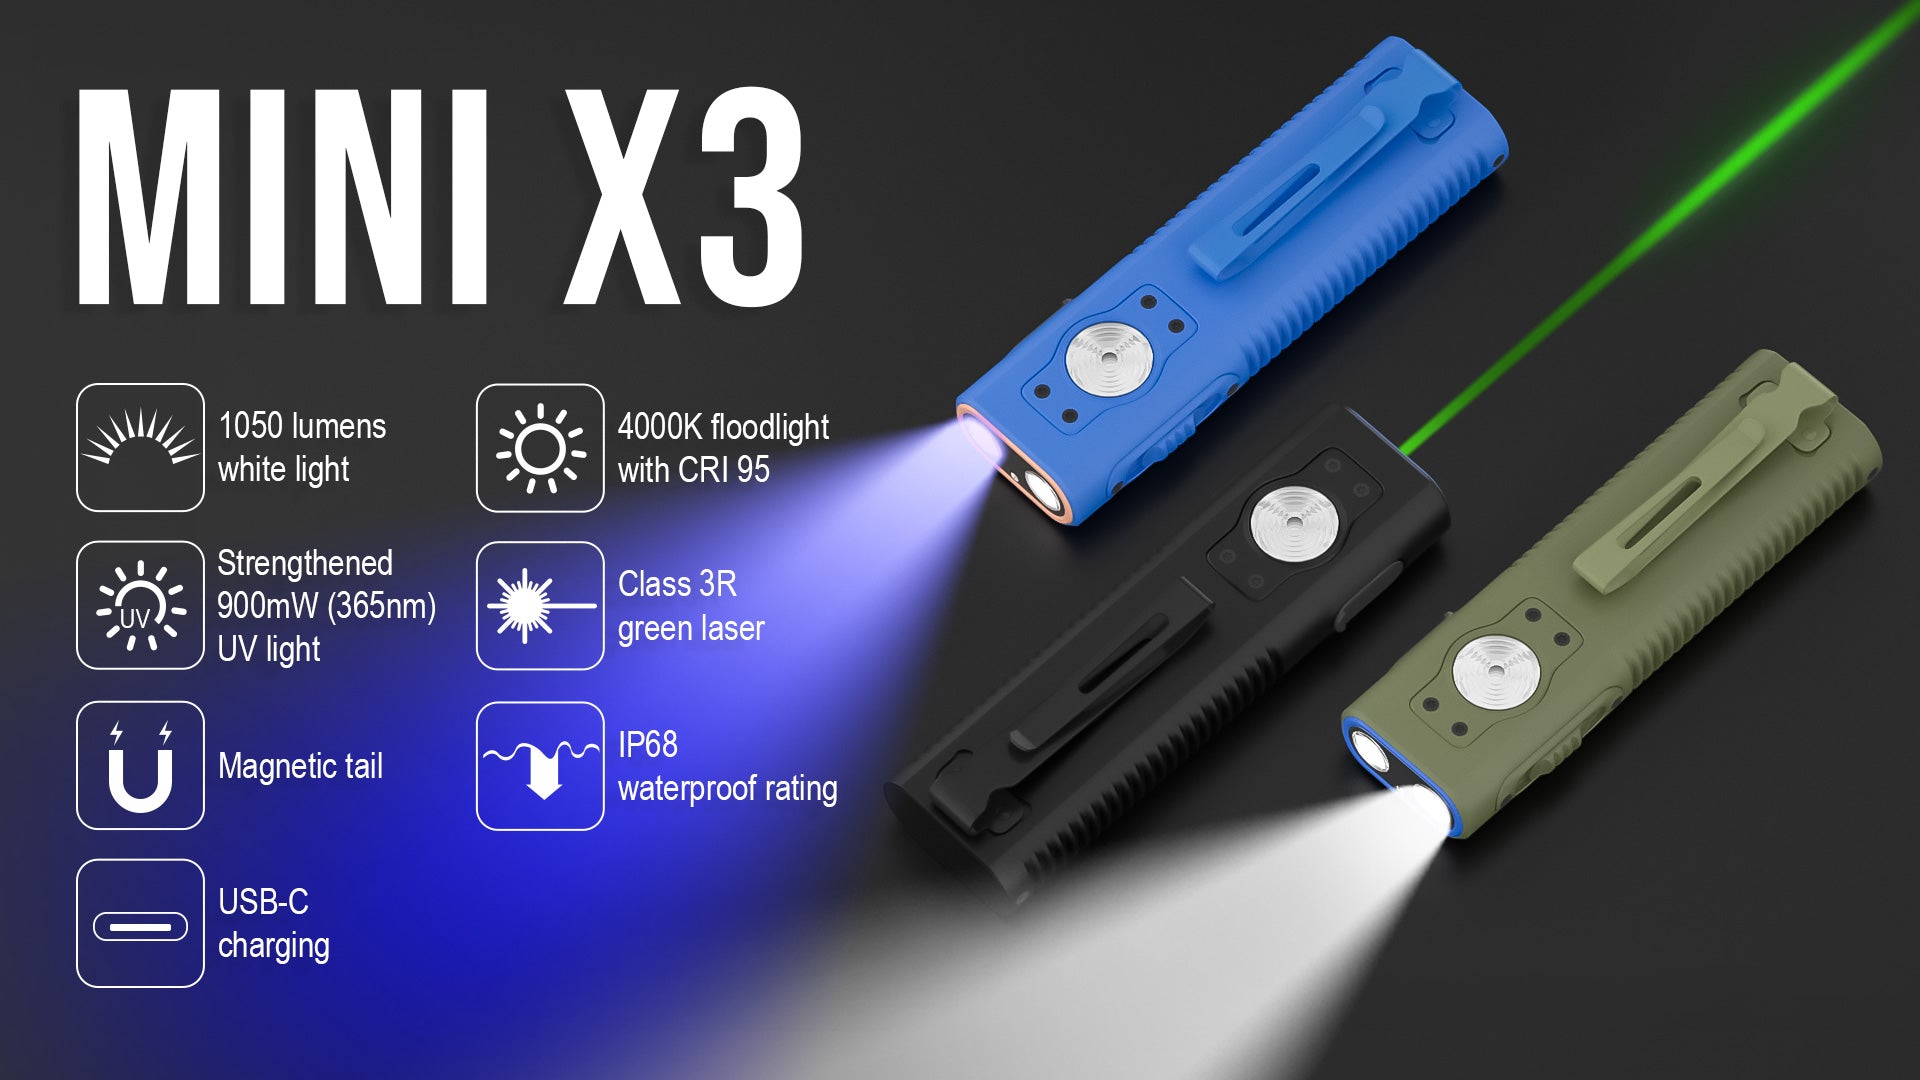 How Important Is a Useful and Multifunctional EDC Flashlight?